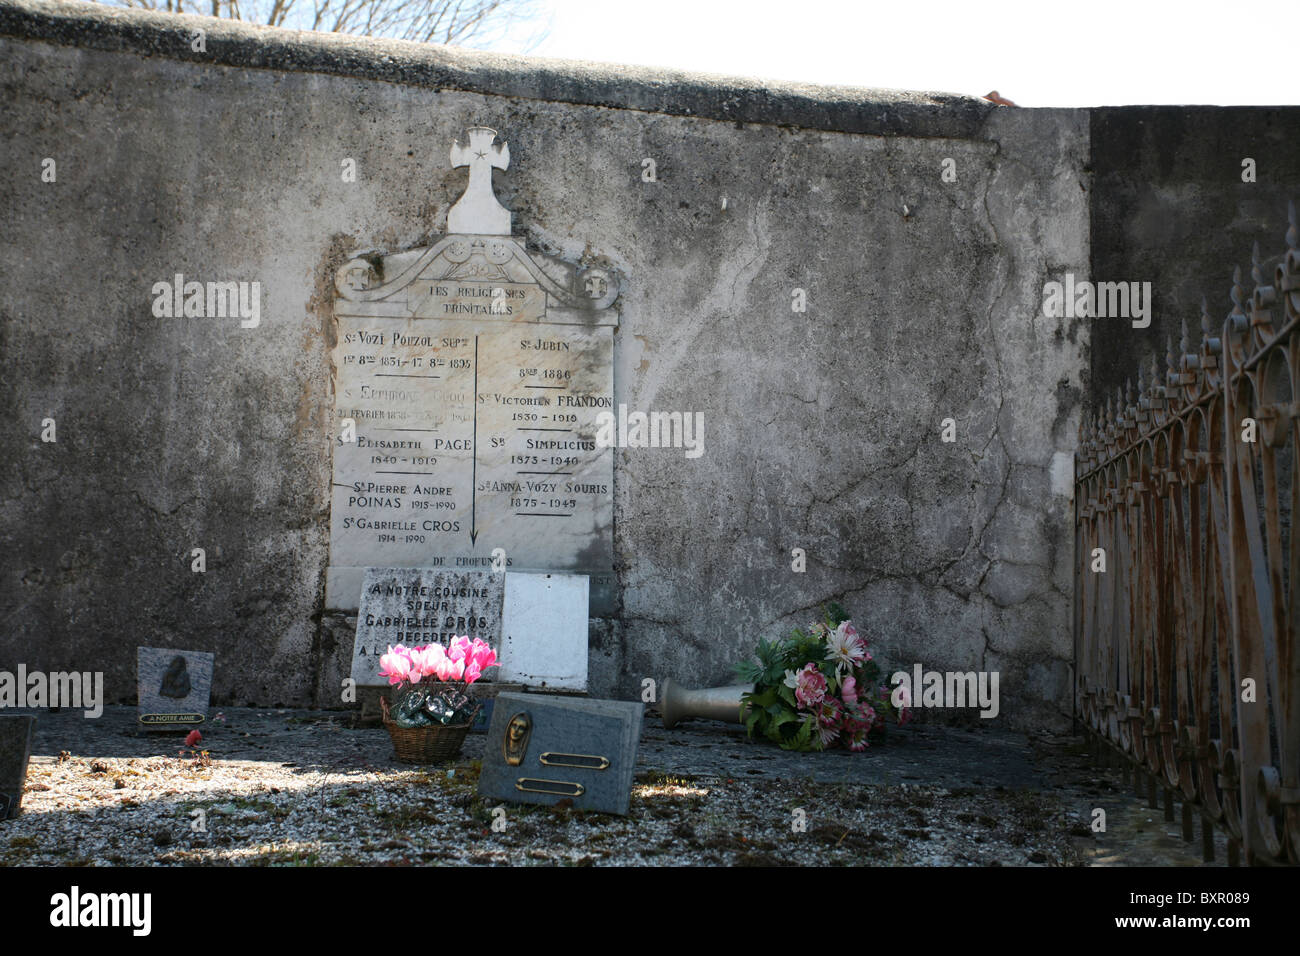 A family burial site, with ornaments and potted flowers, in a French cemetery. Stock Photo